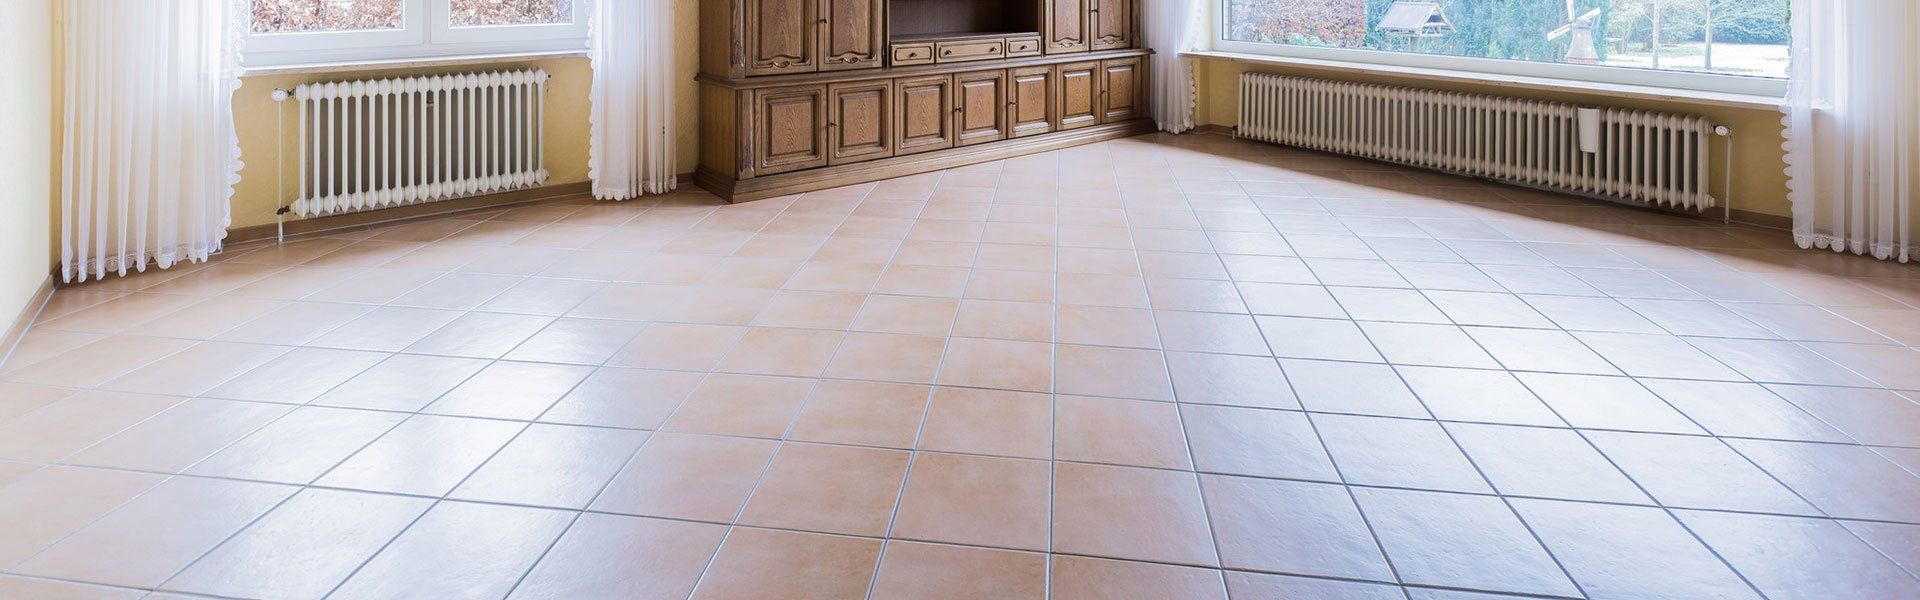 Tiling services in Worcester